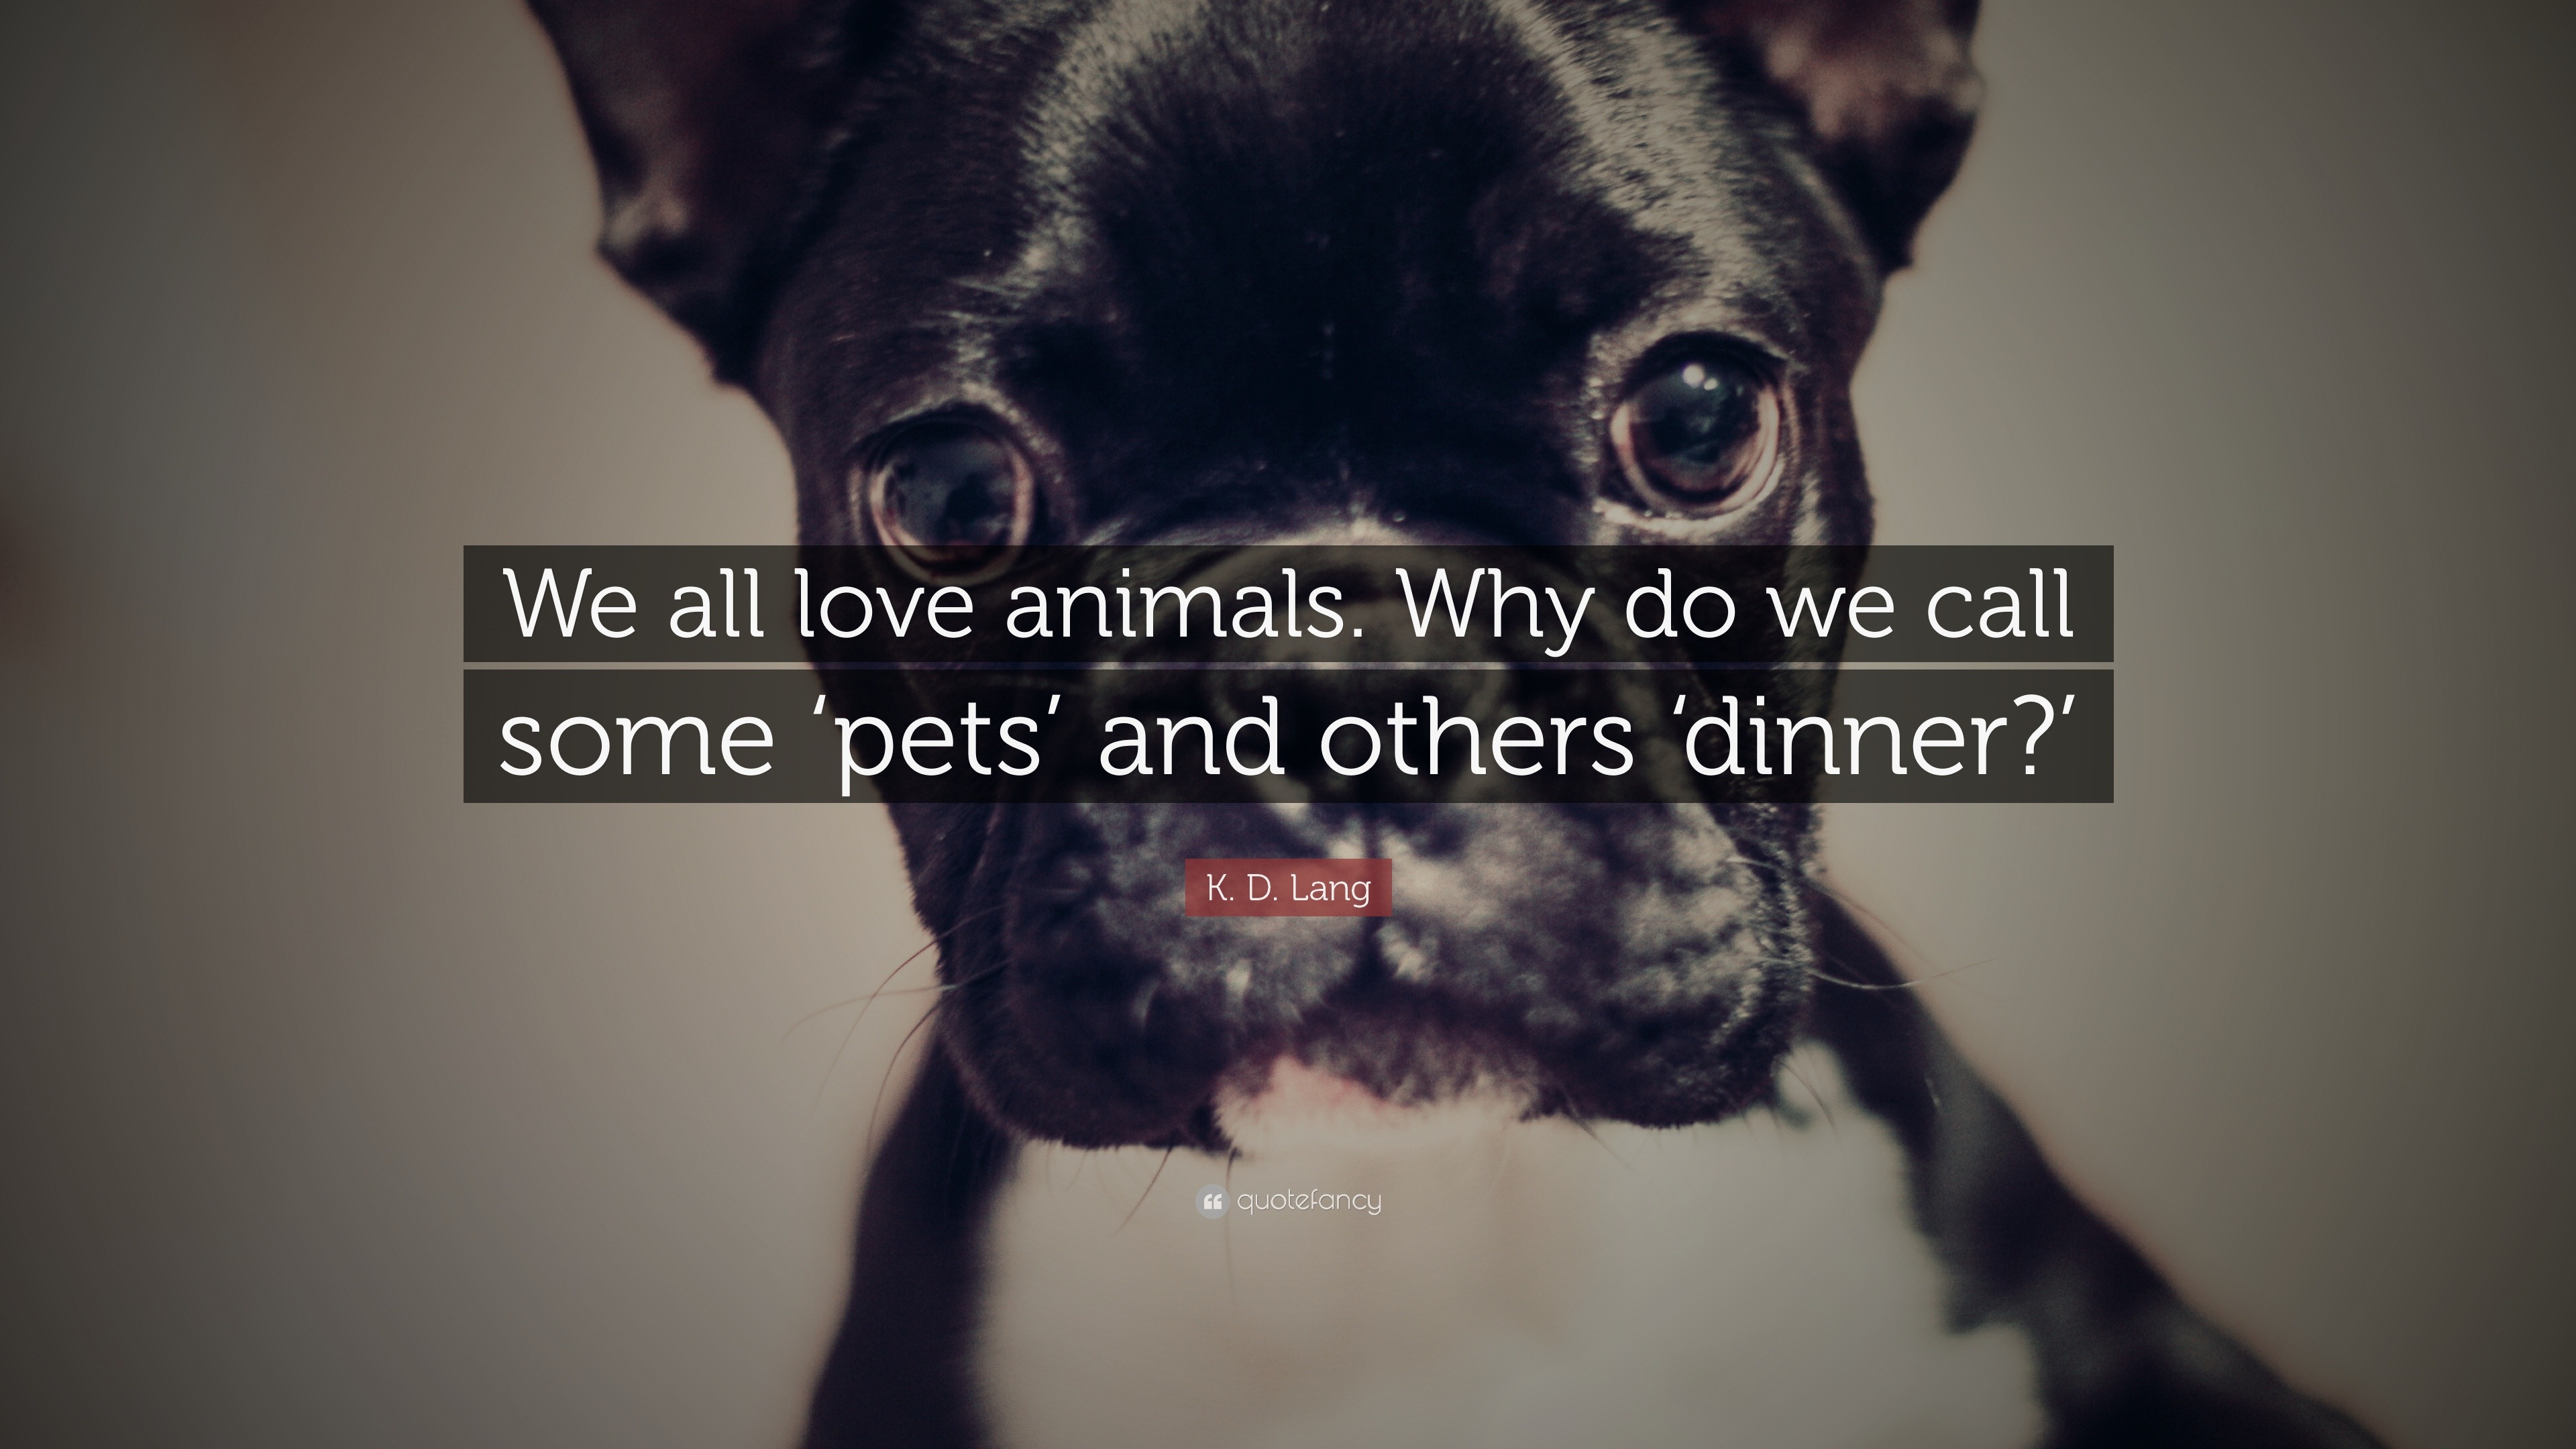 K. D. Lang Quote: “We all love animals. Why do we call some 'pets' and  others 'dinner?'”